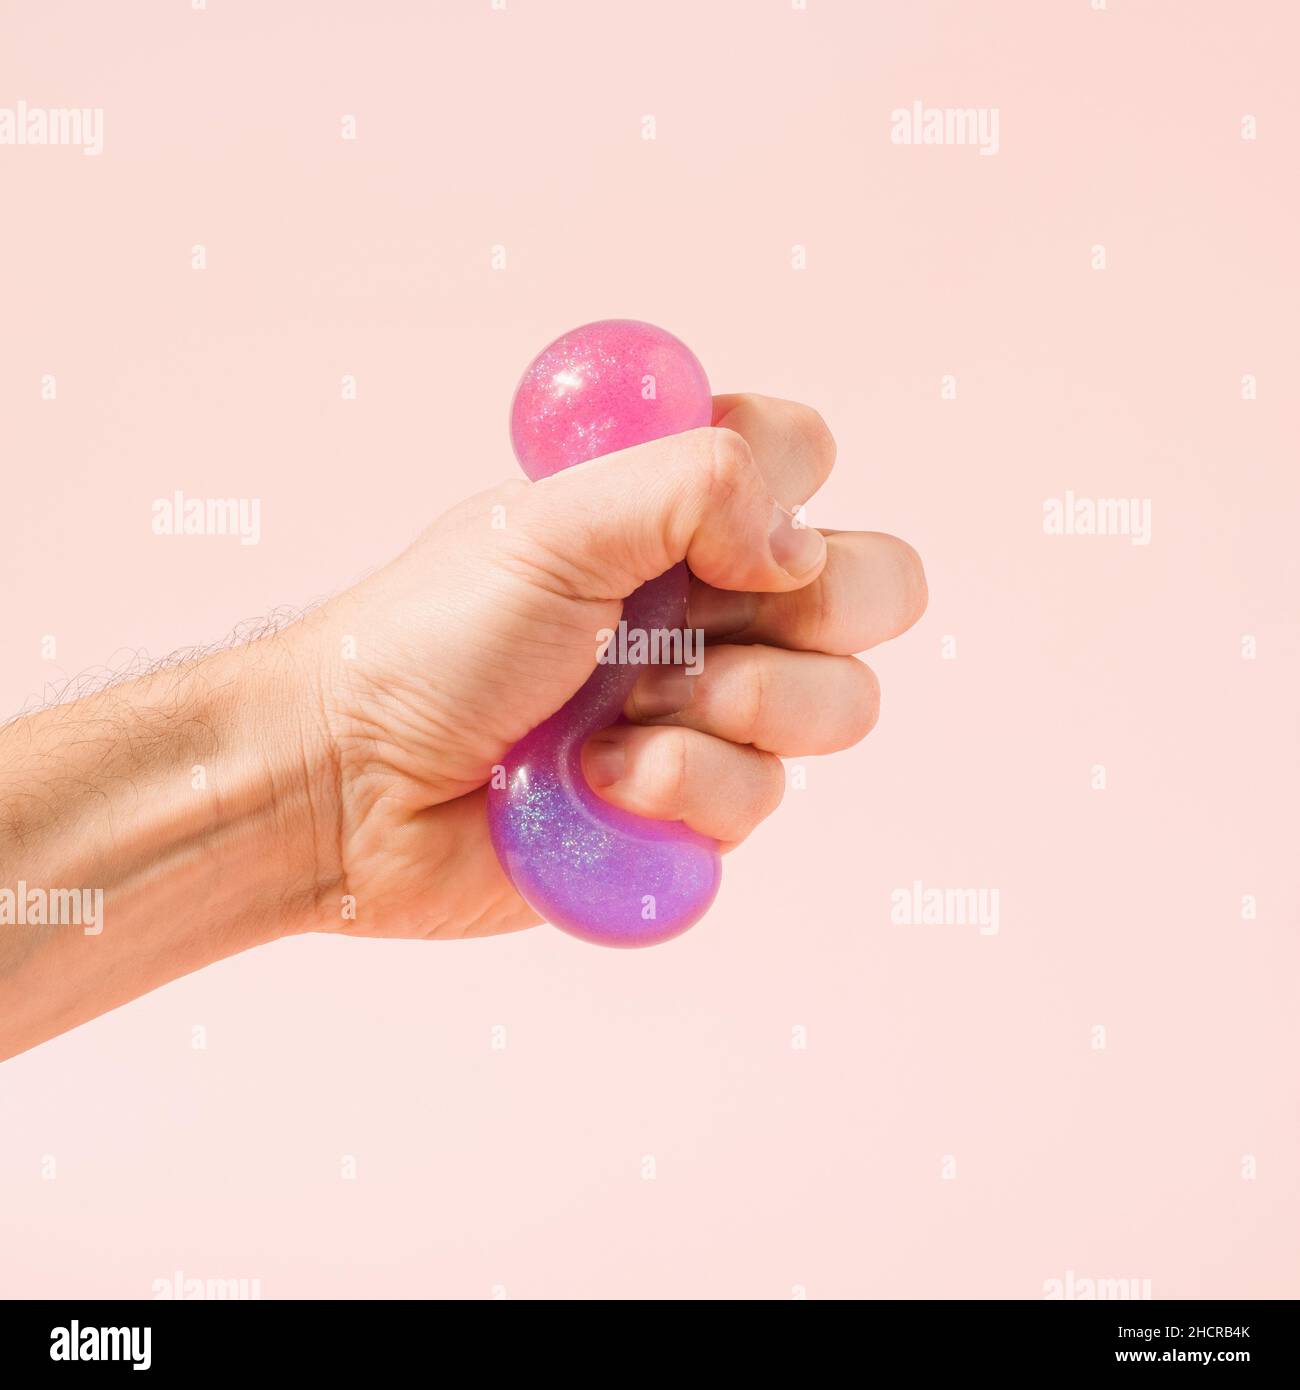 Hand squeezing violet purple glitter slime on a pastel pink background. Immersive reality conceptual background. Stock Photo